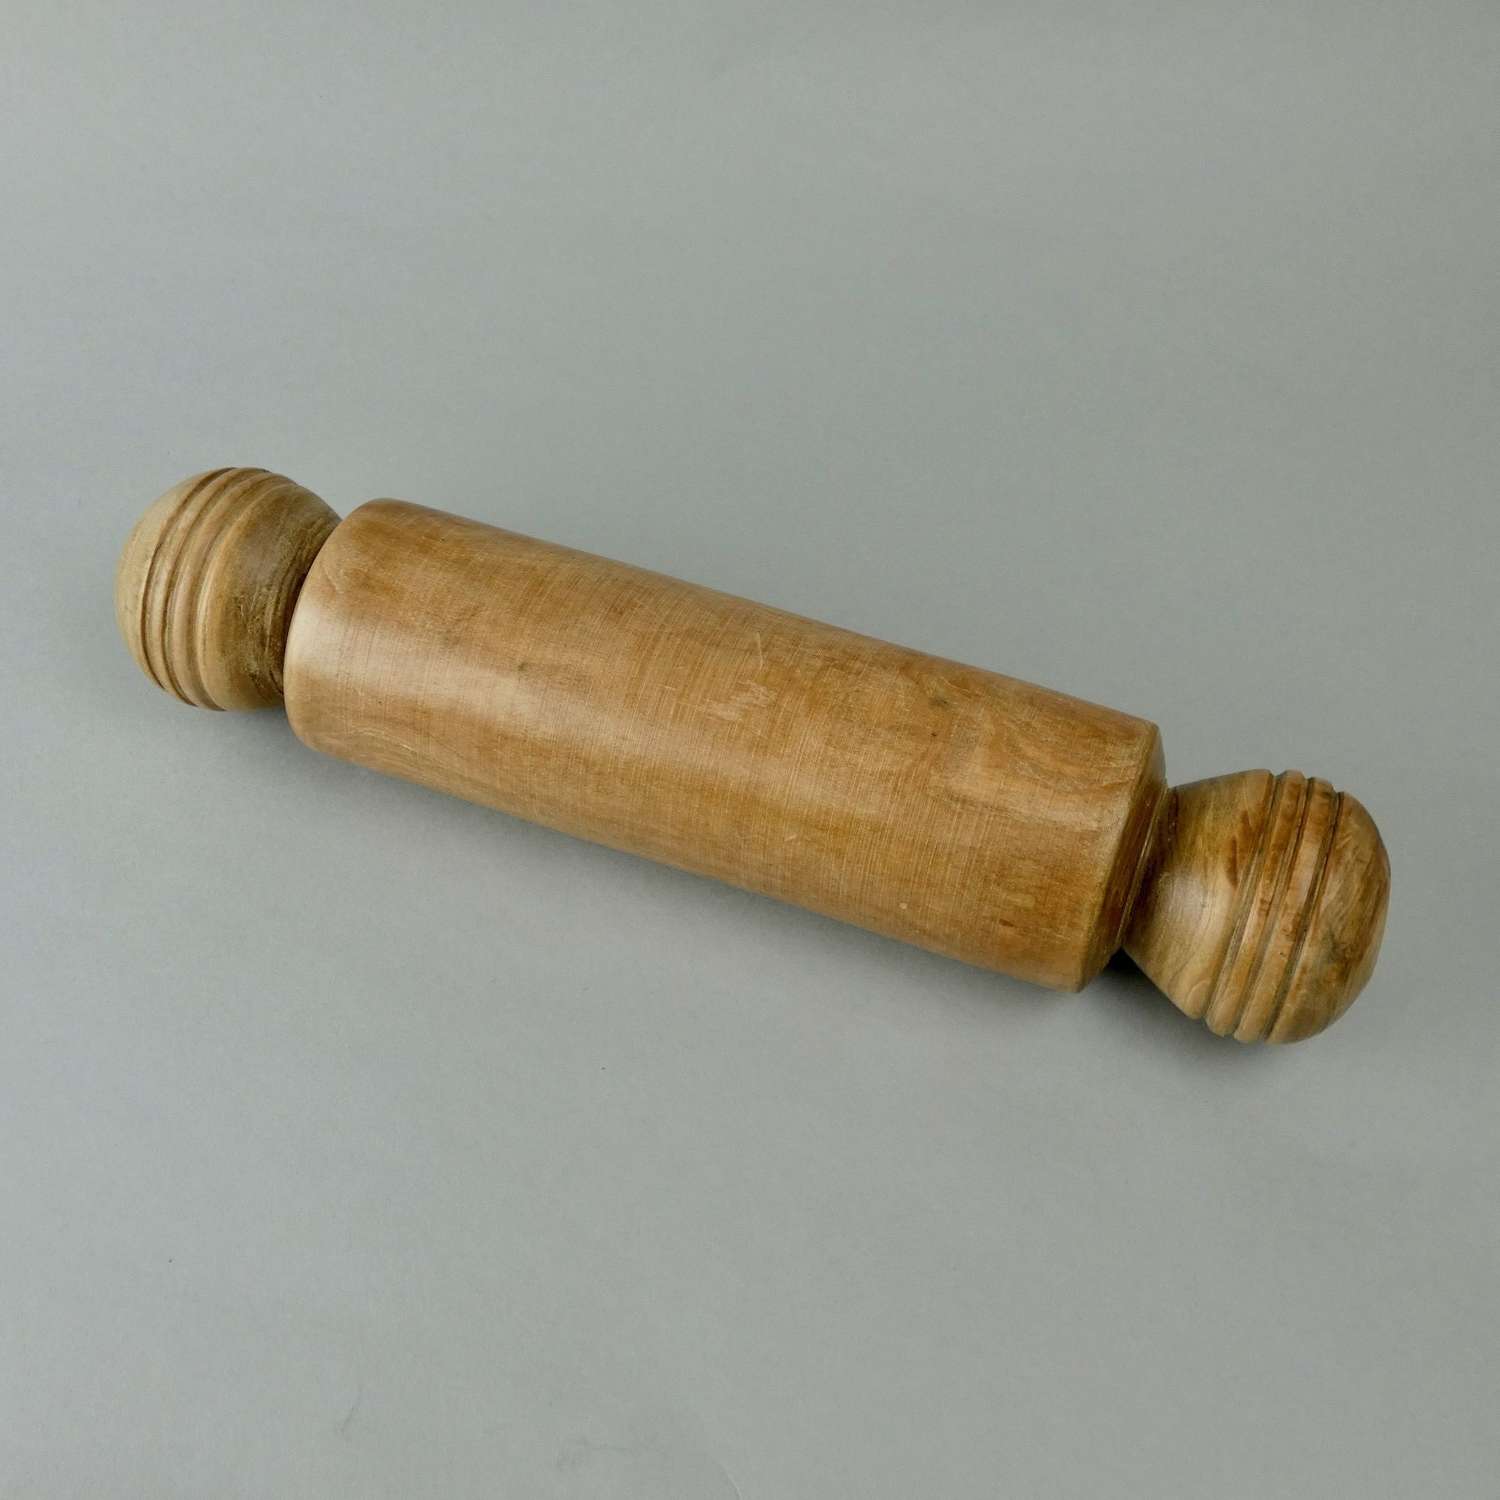 Lovely, vintage rolling pin